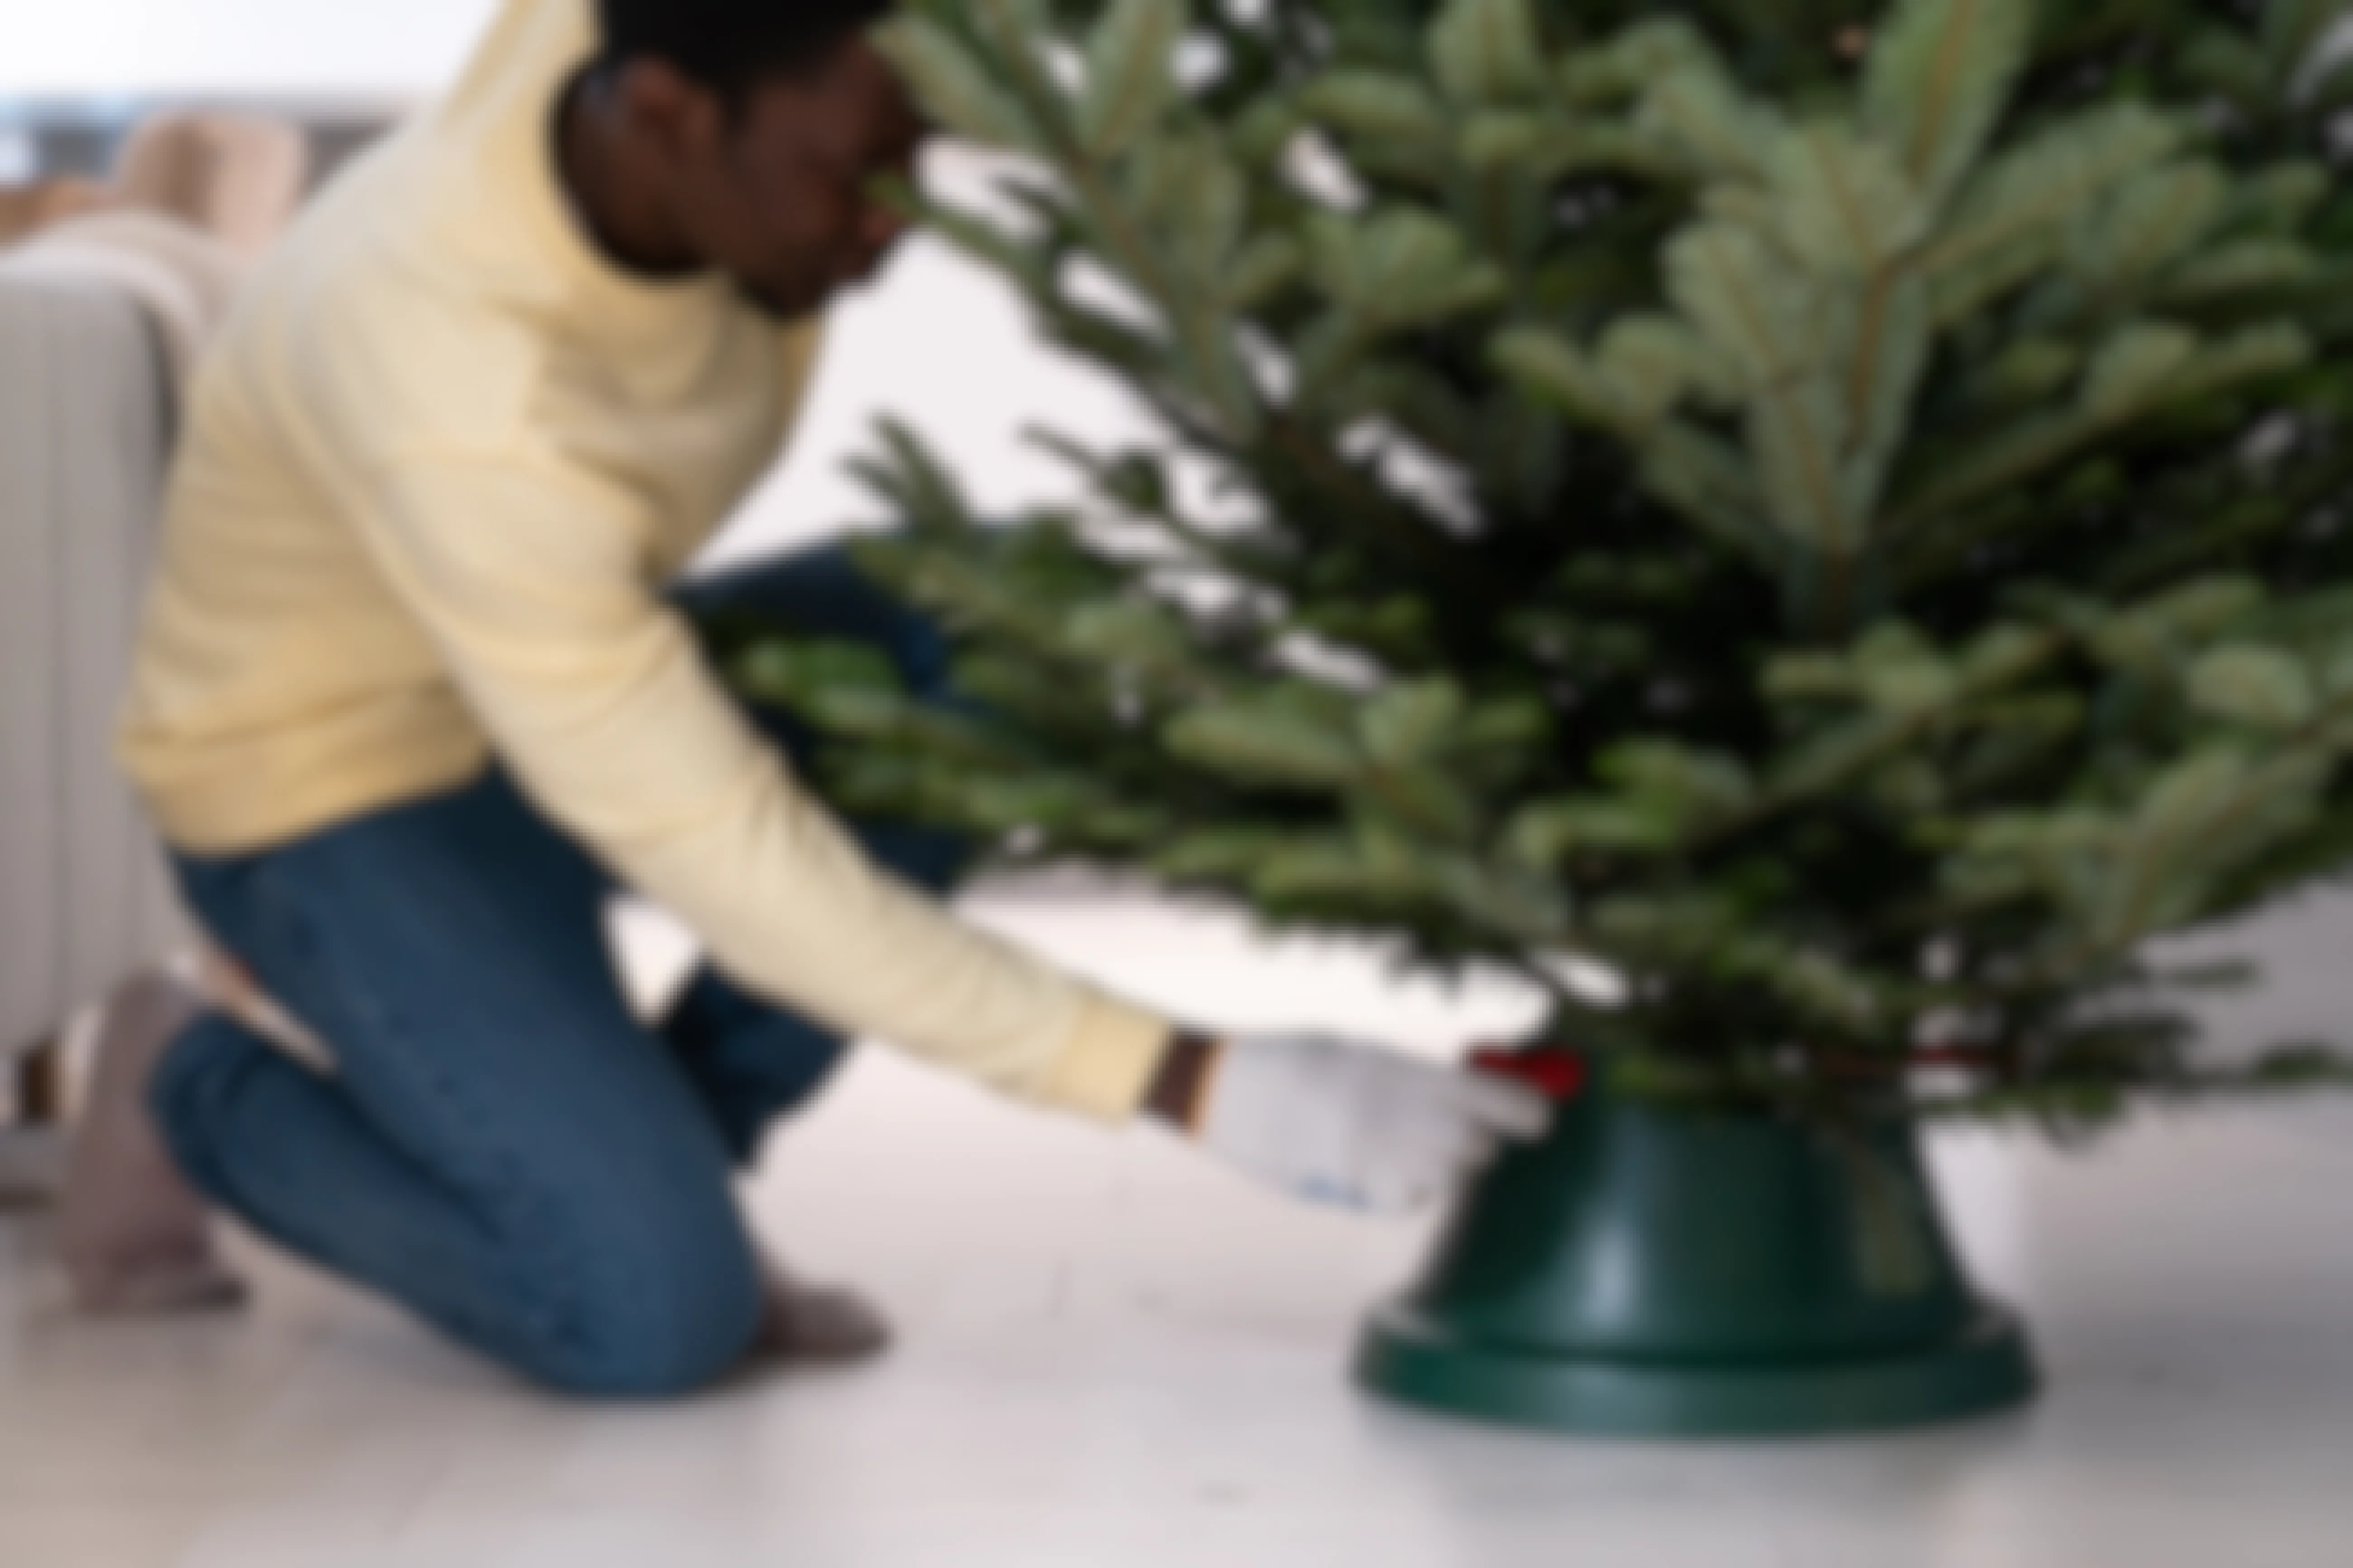 These Are the Best Christmas Tree Stands for Your Money